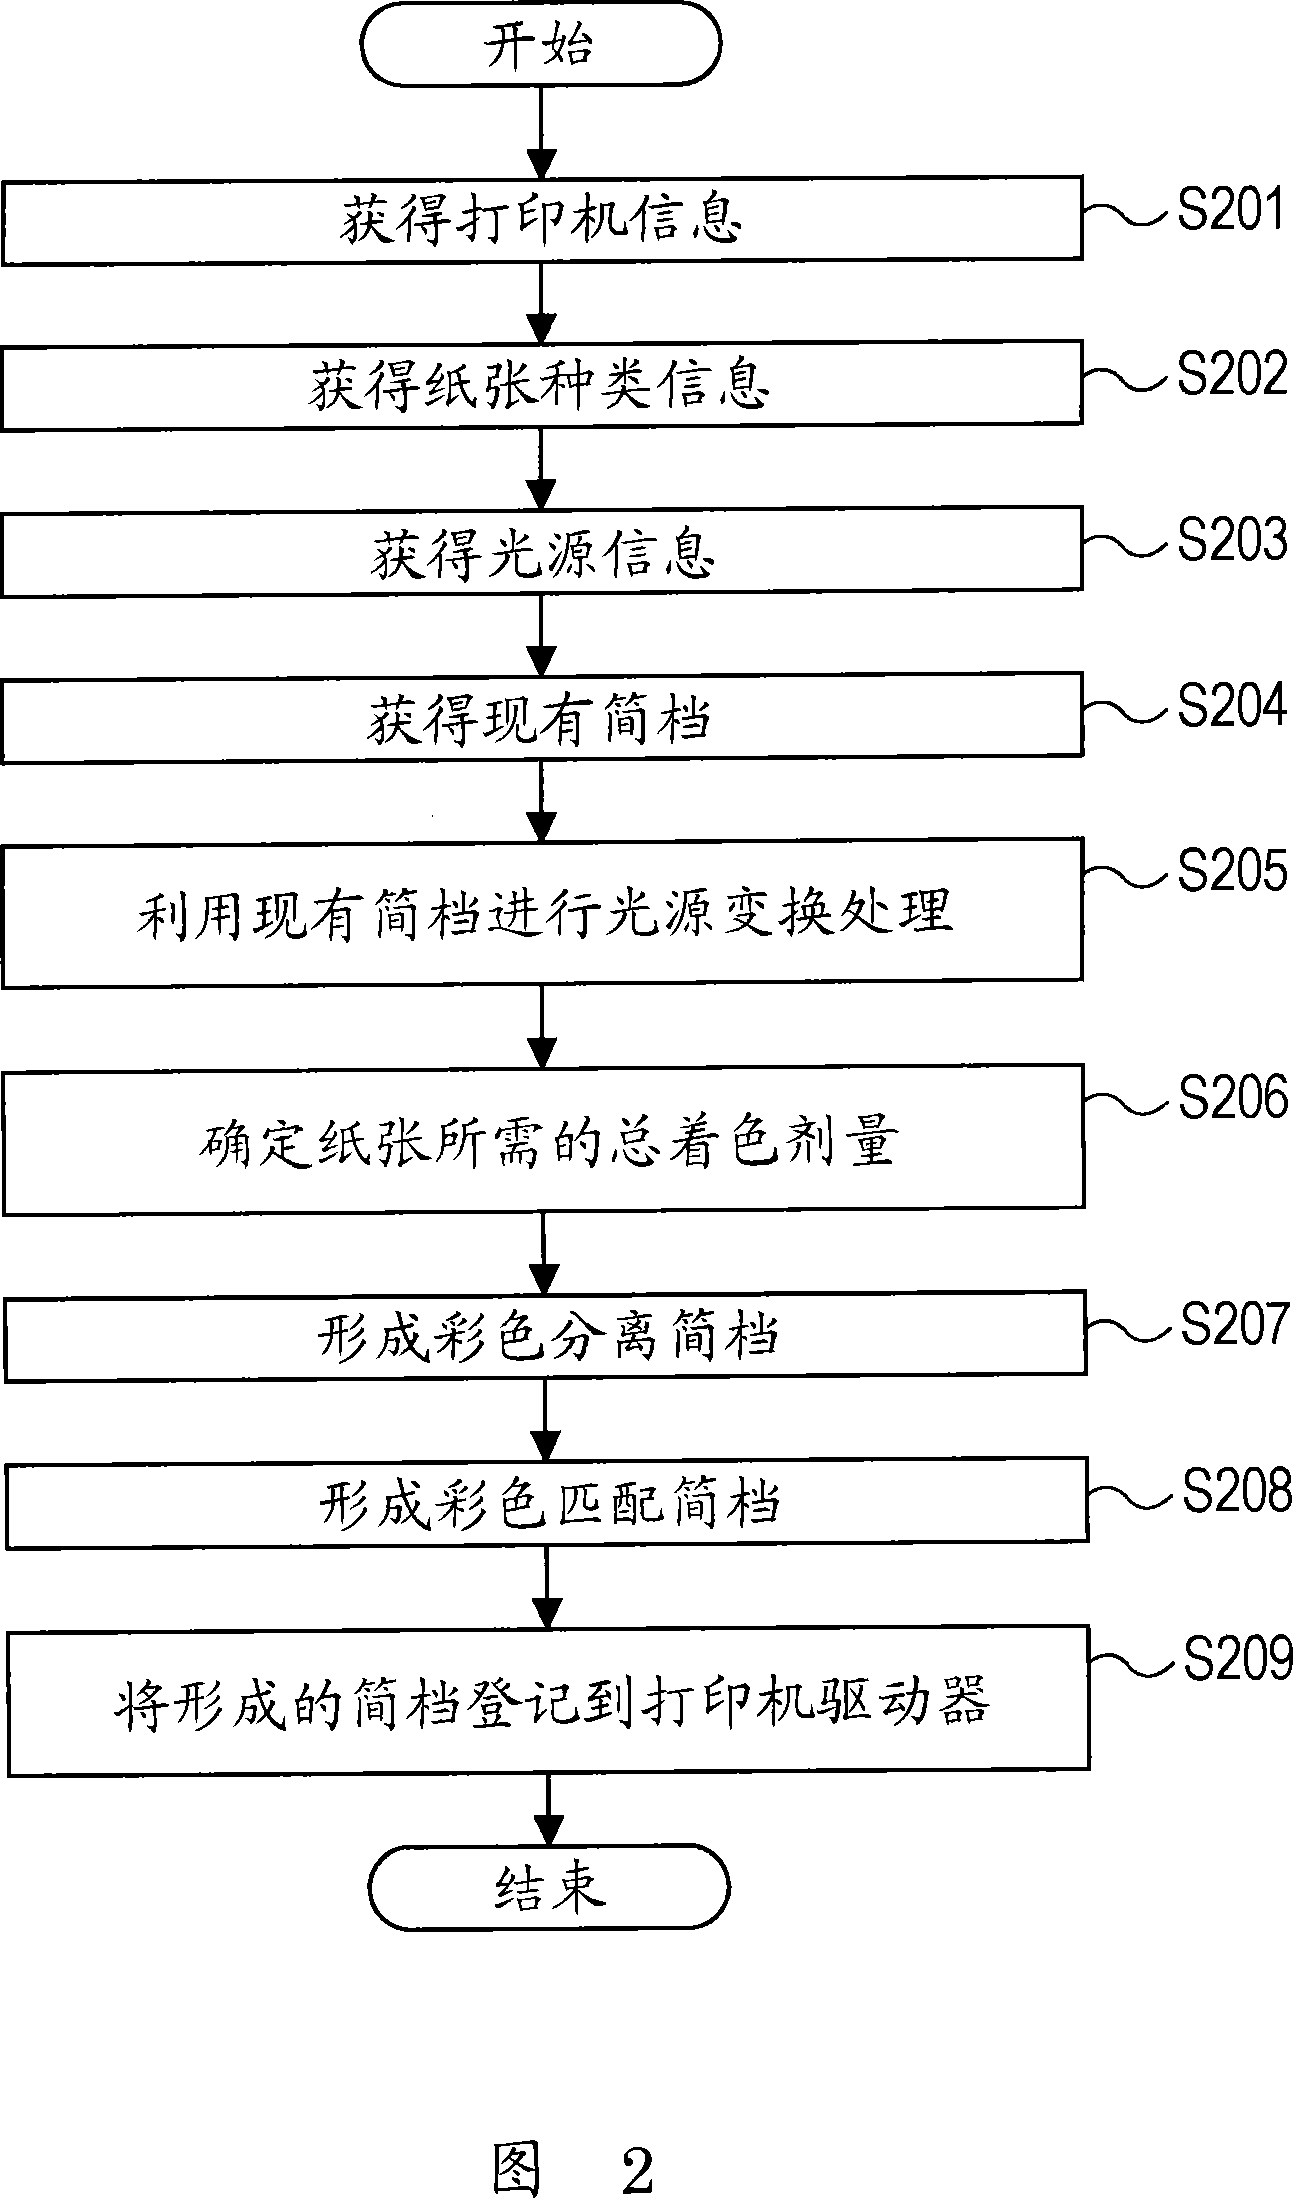 Profile forming method, profile forming program, and printing system